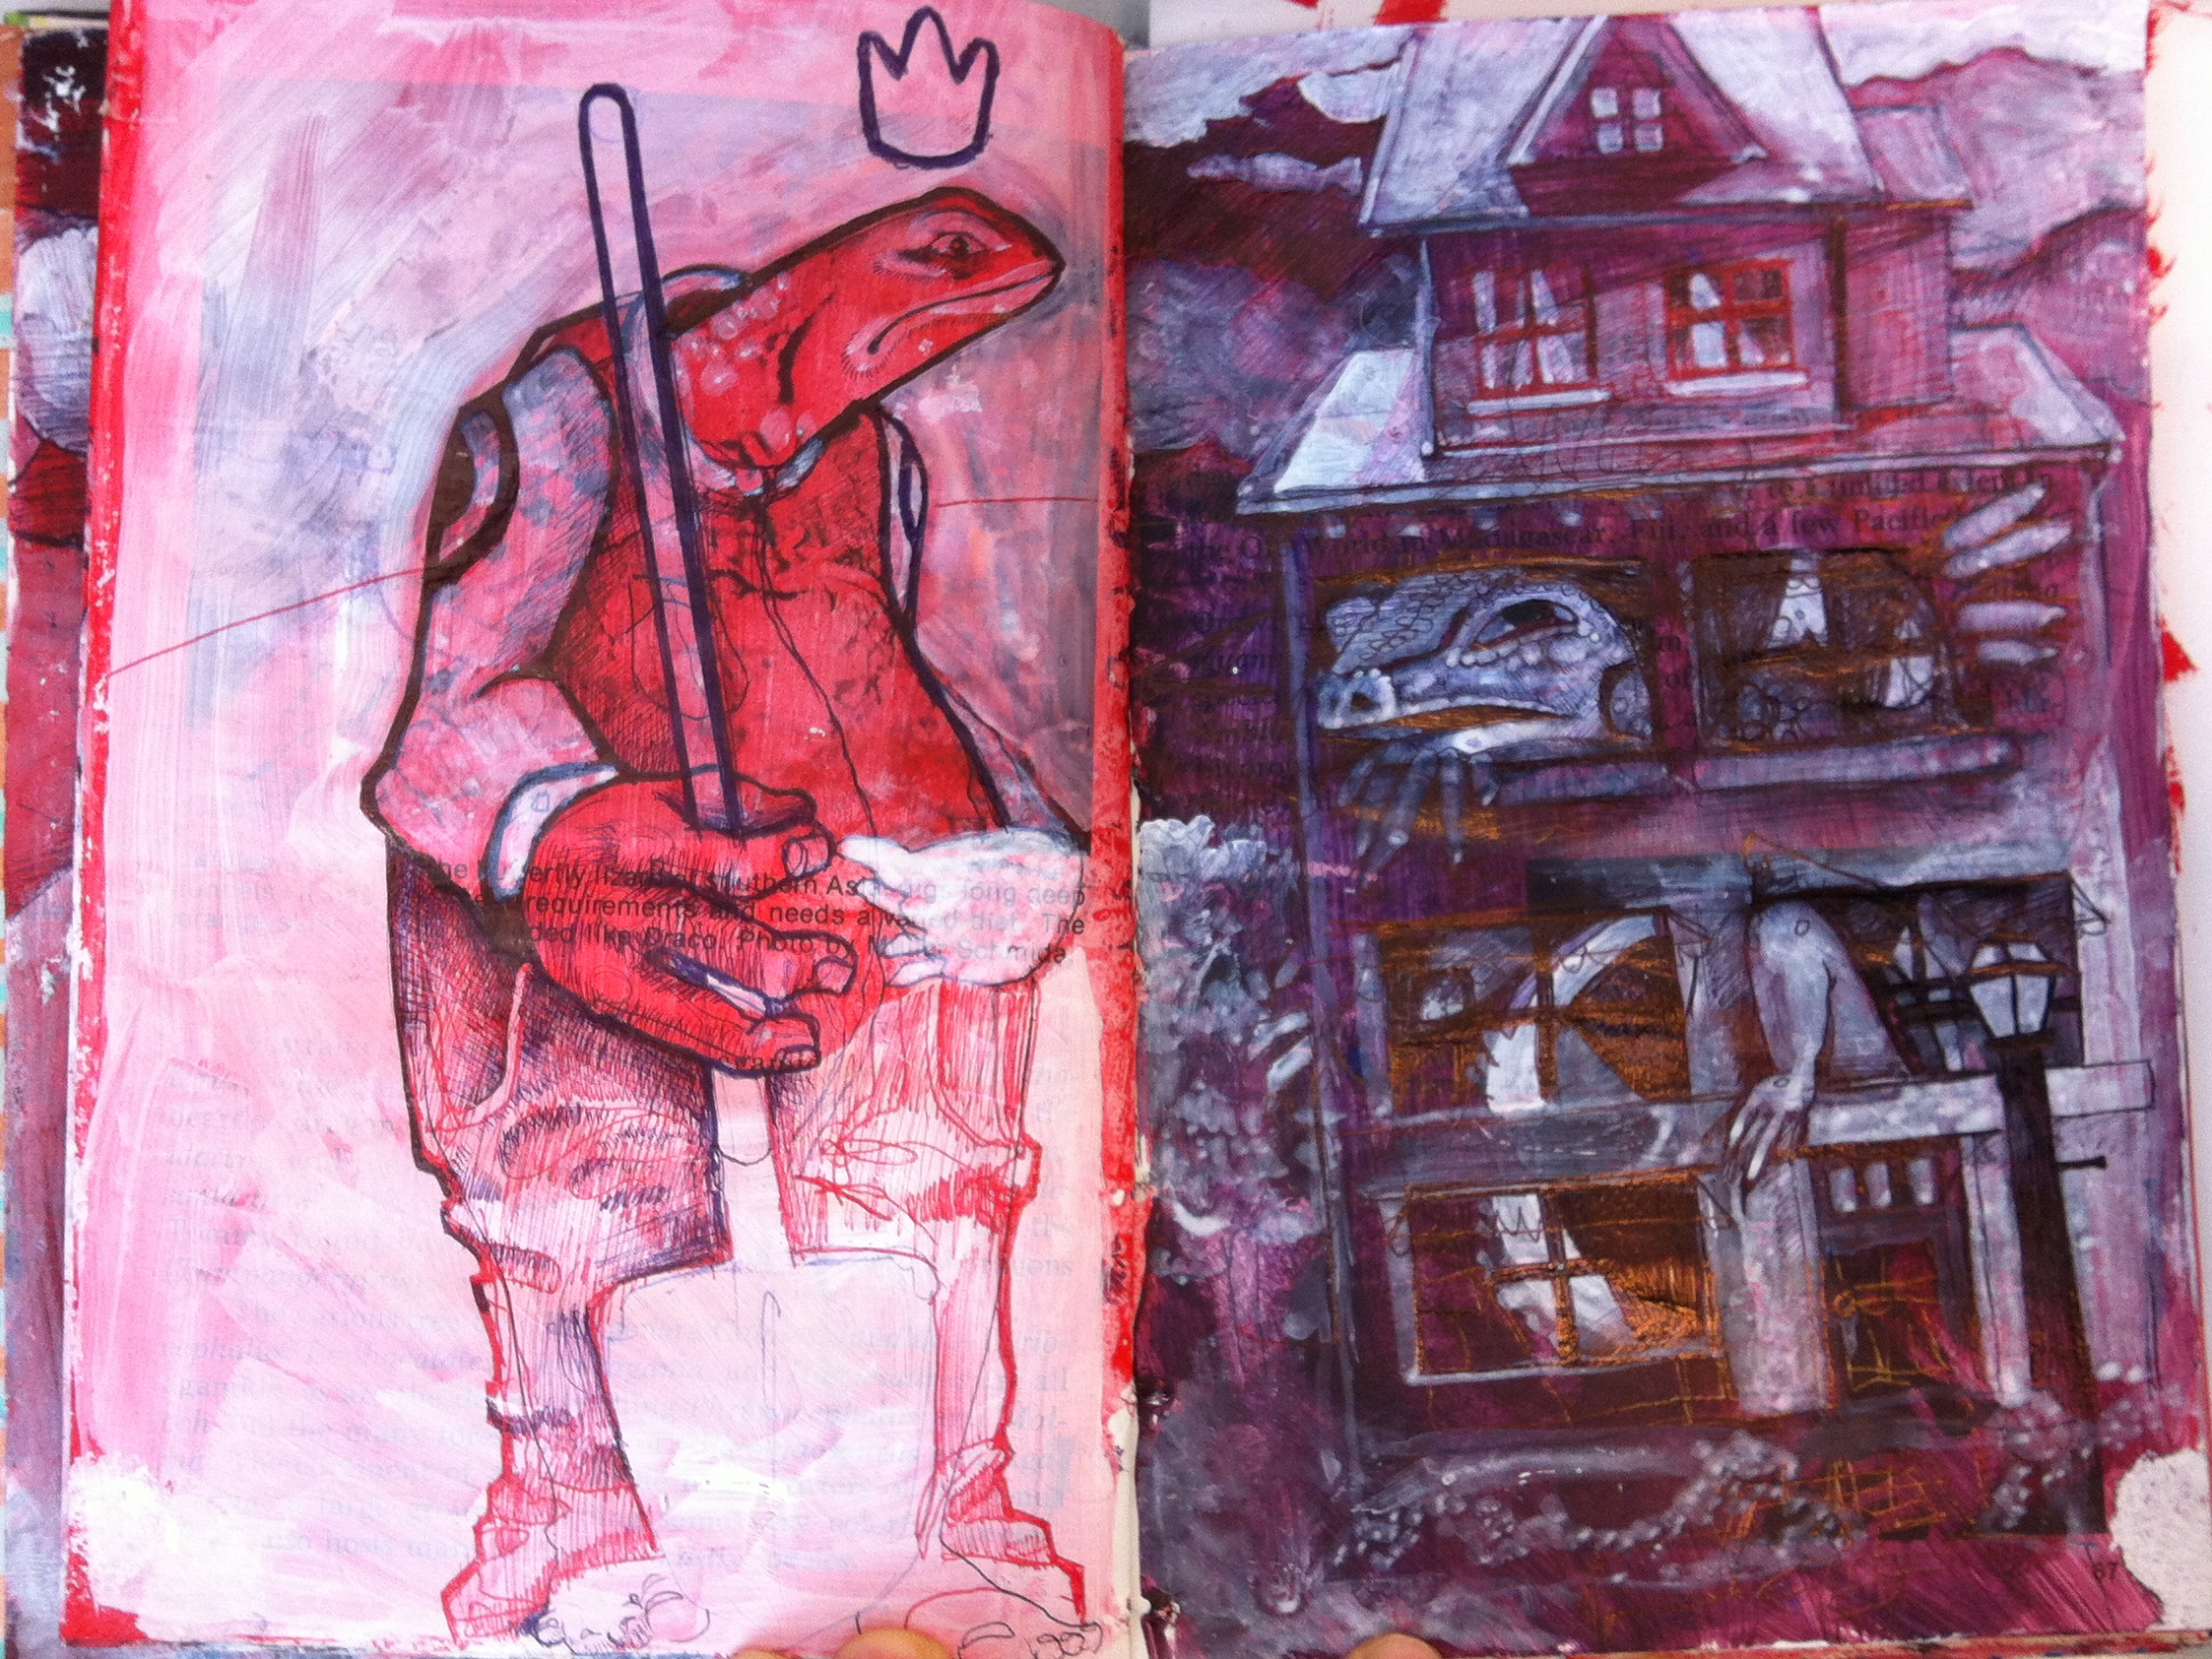 Ink drawing of lizard with shovel and opposite page a house with giant lizard in it, on red background with white 